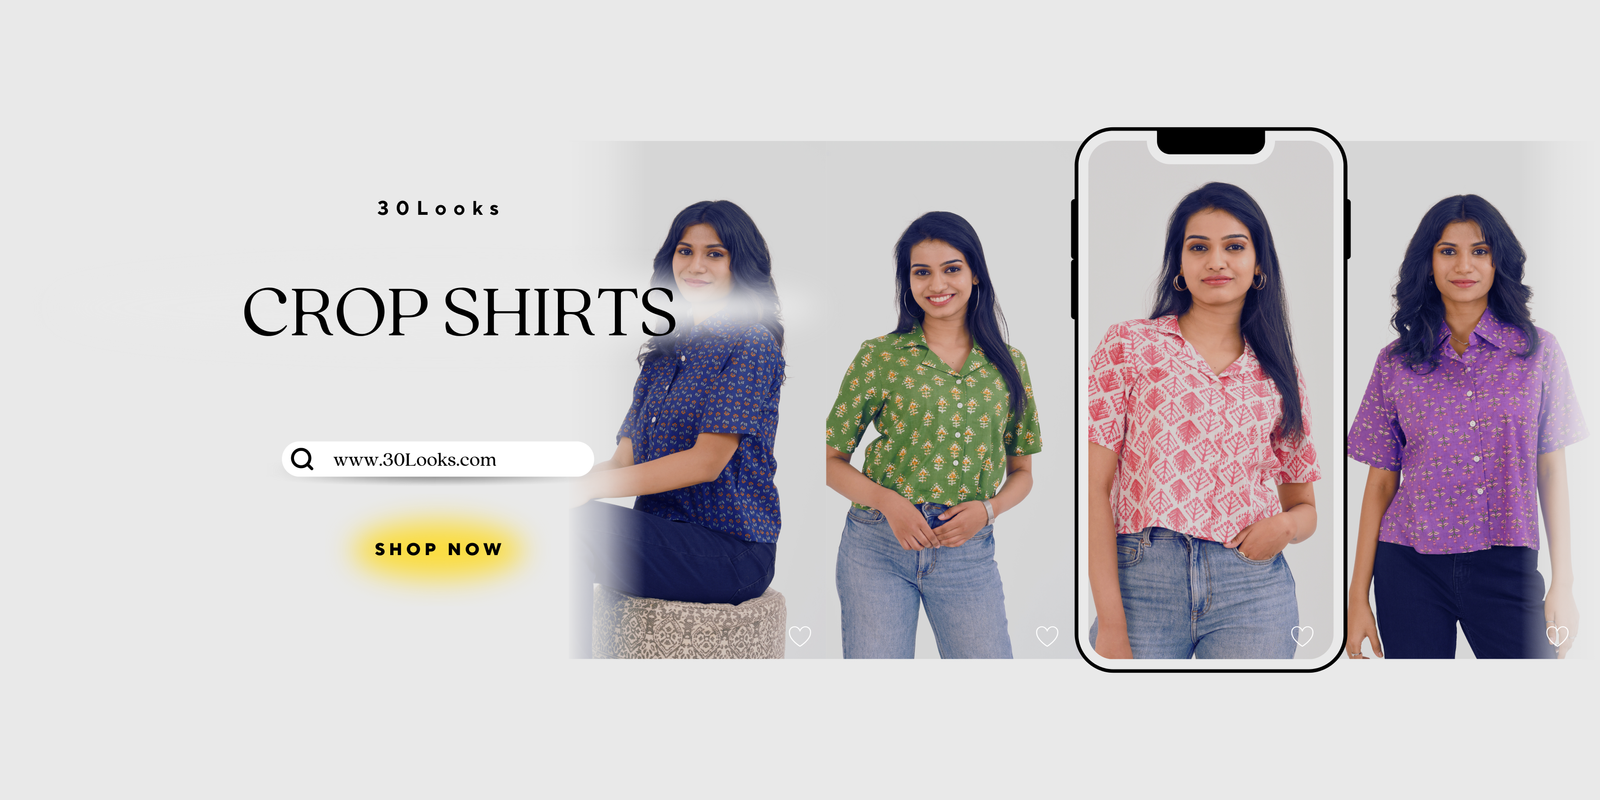 Styling Tips for 30Looks’ Printed Crop Shirts